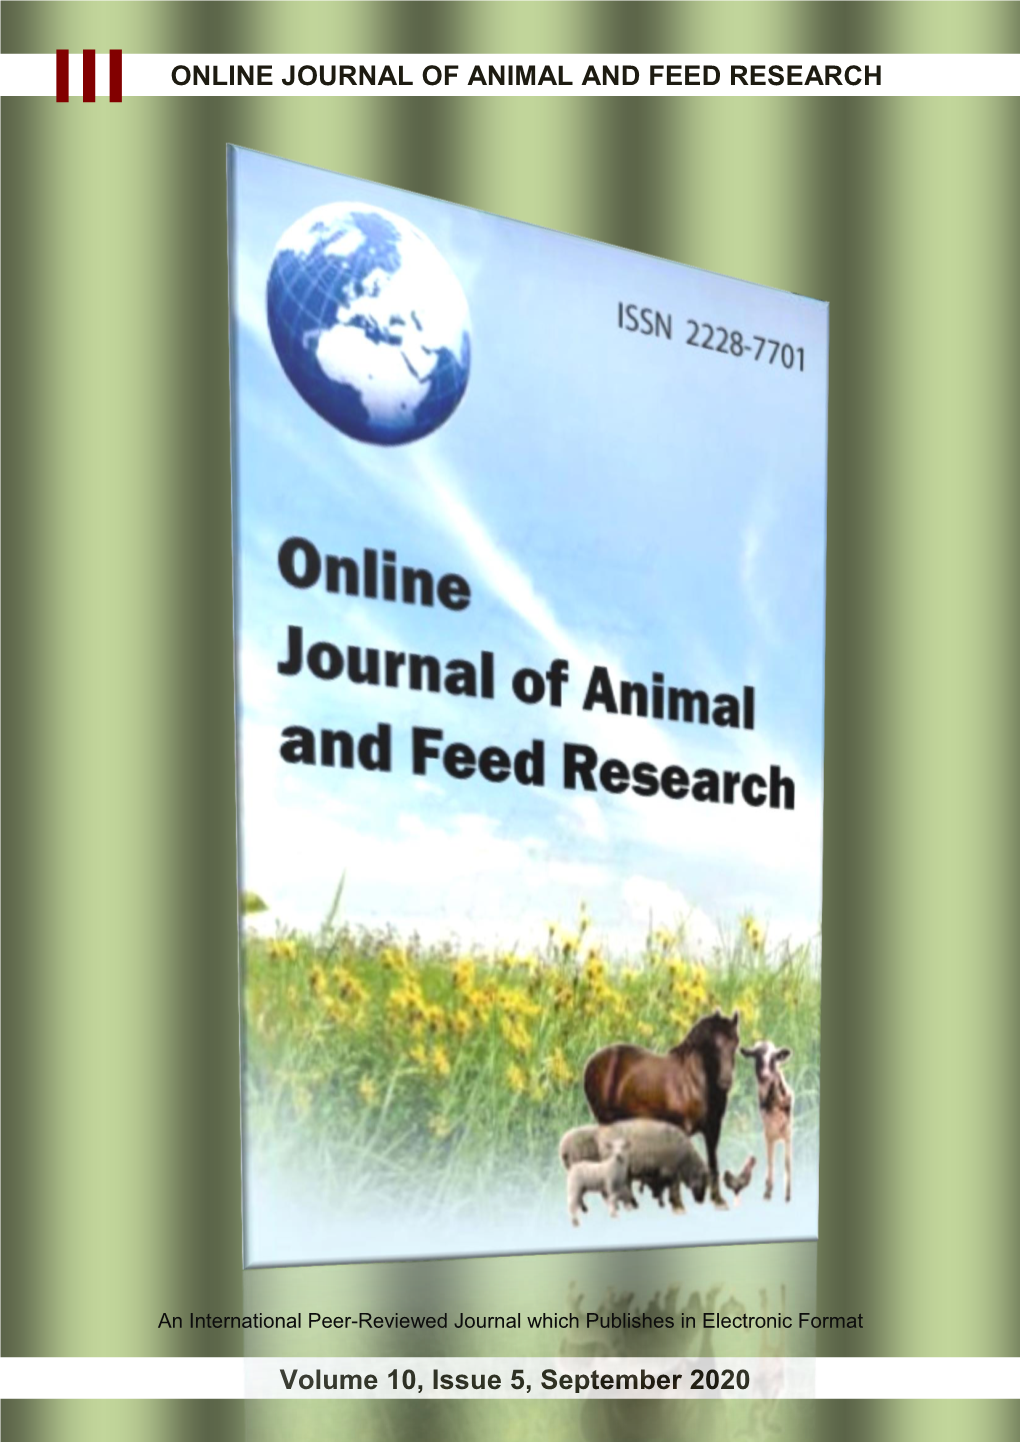 Online Journal of Animal and Feed Research